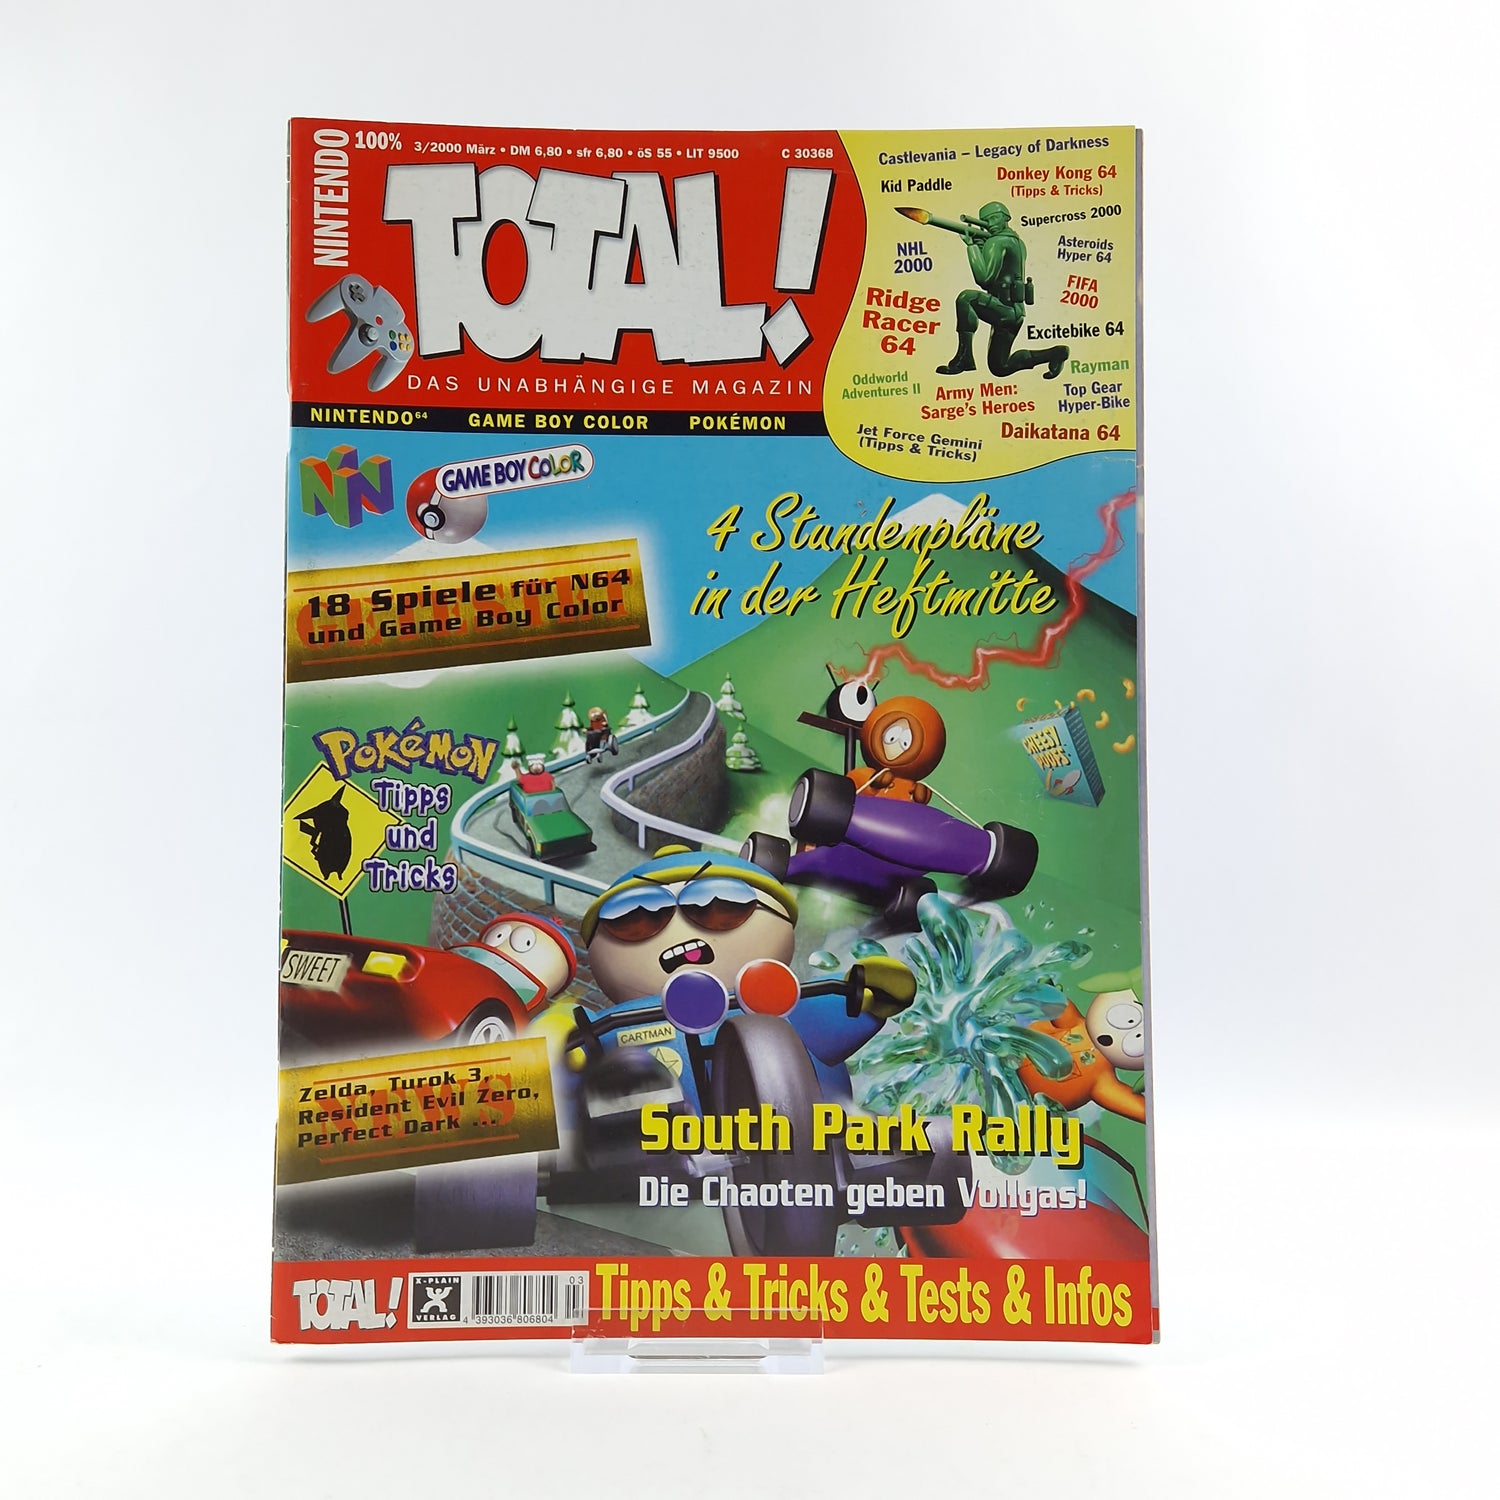 100% Nintendo TOTAL! Magazine: South Park Rally March 2000 - total magazine